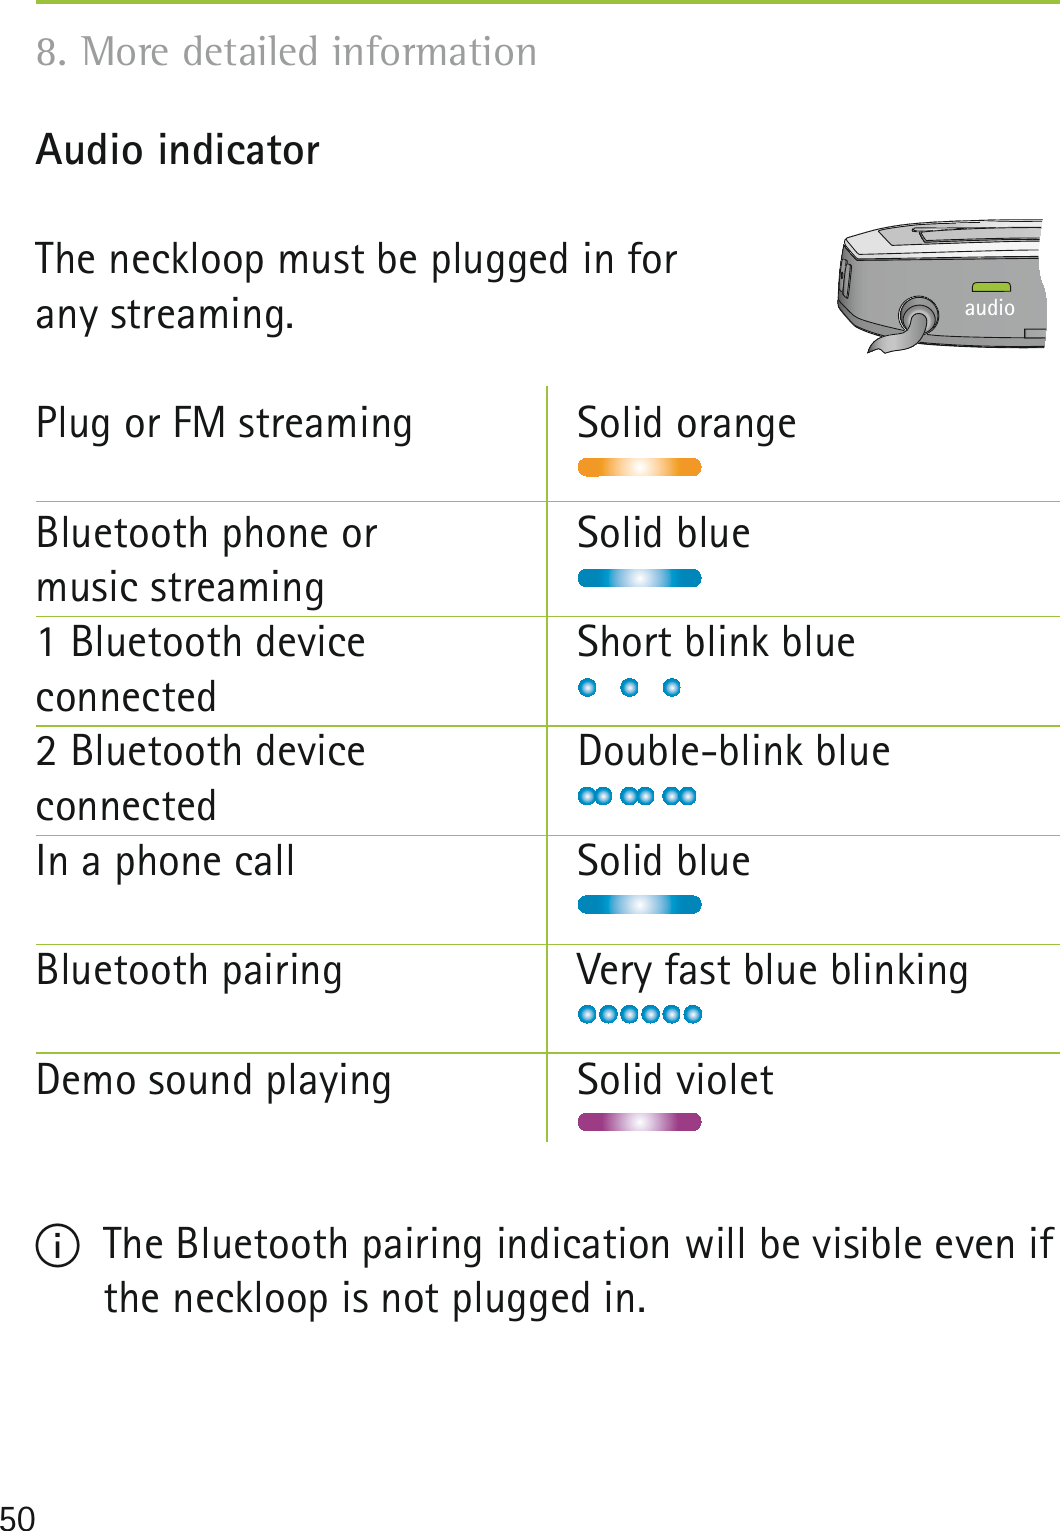 50Audio indicator The neckloop must be plugged in for any streaming.Plug or FM streaming  Solid orangeBluetooth phone or   Solid bluemusic streaming 1 Bluetooth device   Short blink blue connected 2 Bluetooth device   Double-blink blue connected In a phone call  Solid blueBluetooth pairing  Very fast blue blinkingDemo sound playing  Solid violetI  The Bluetooth pairing indication will be visible even if the neckloop is not plugged in.audio8. More detailed information 